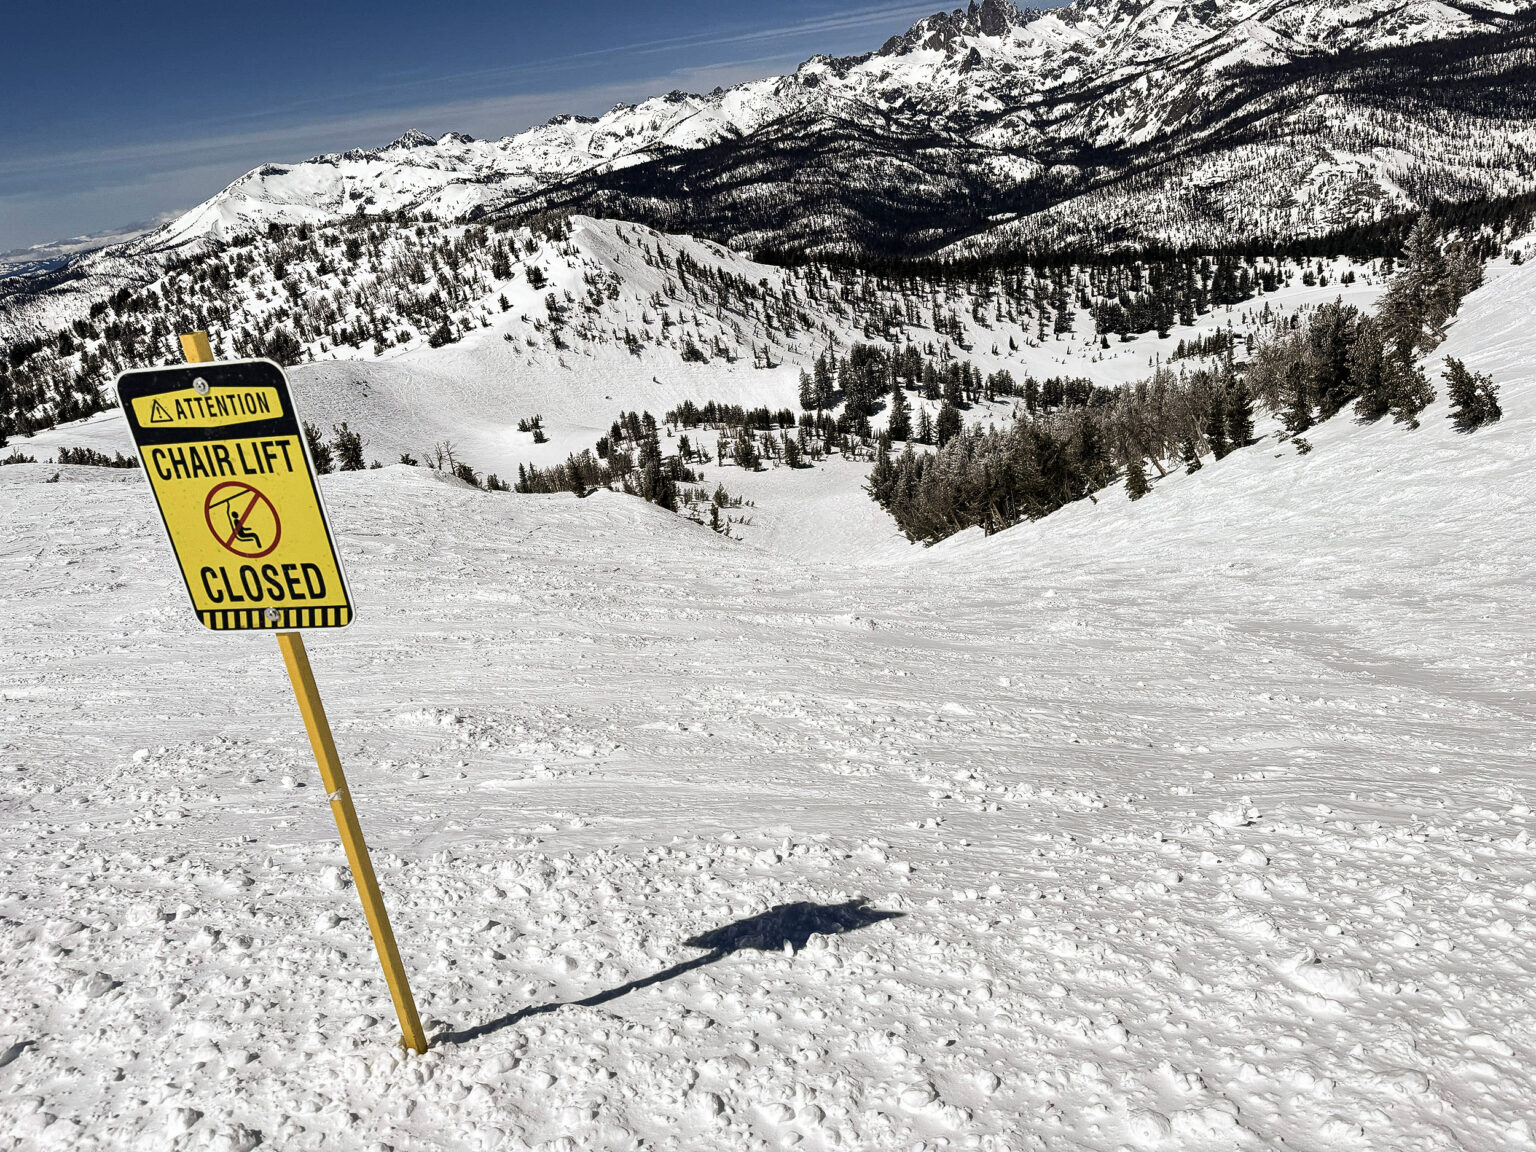 4-15-24 - Chair 14 and the Backside are Closed expect for Road Runner